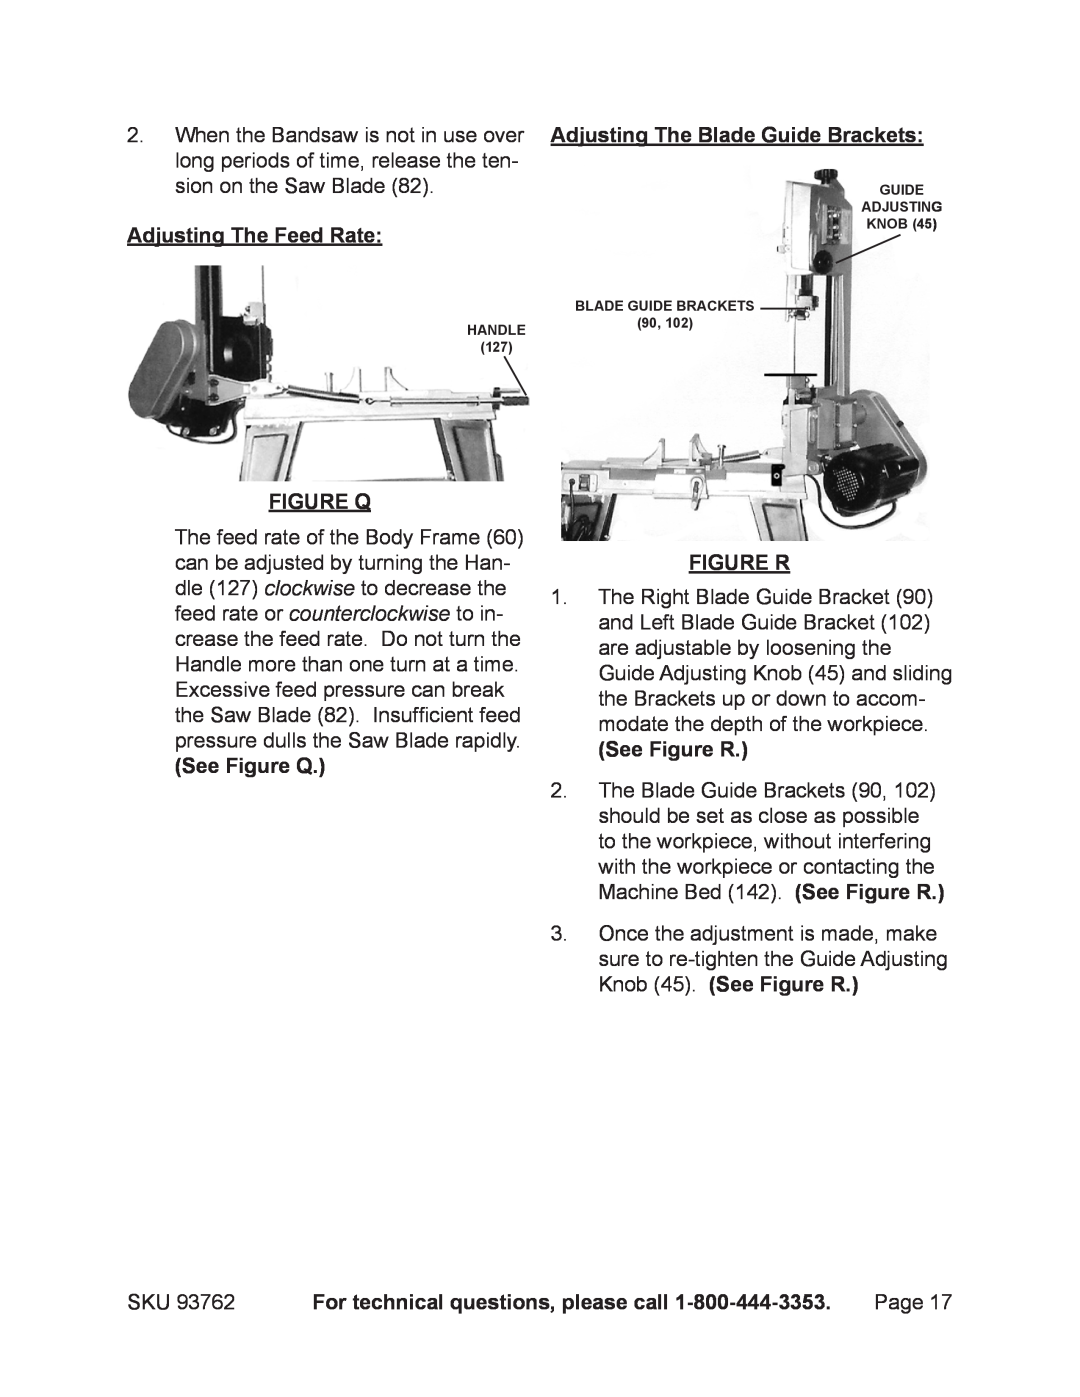 Harbor Freight Tools 93762 Adjusting The Feed Rate, See Figure Q, Adjusting The Blade Guide Brackets, Figure R 